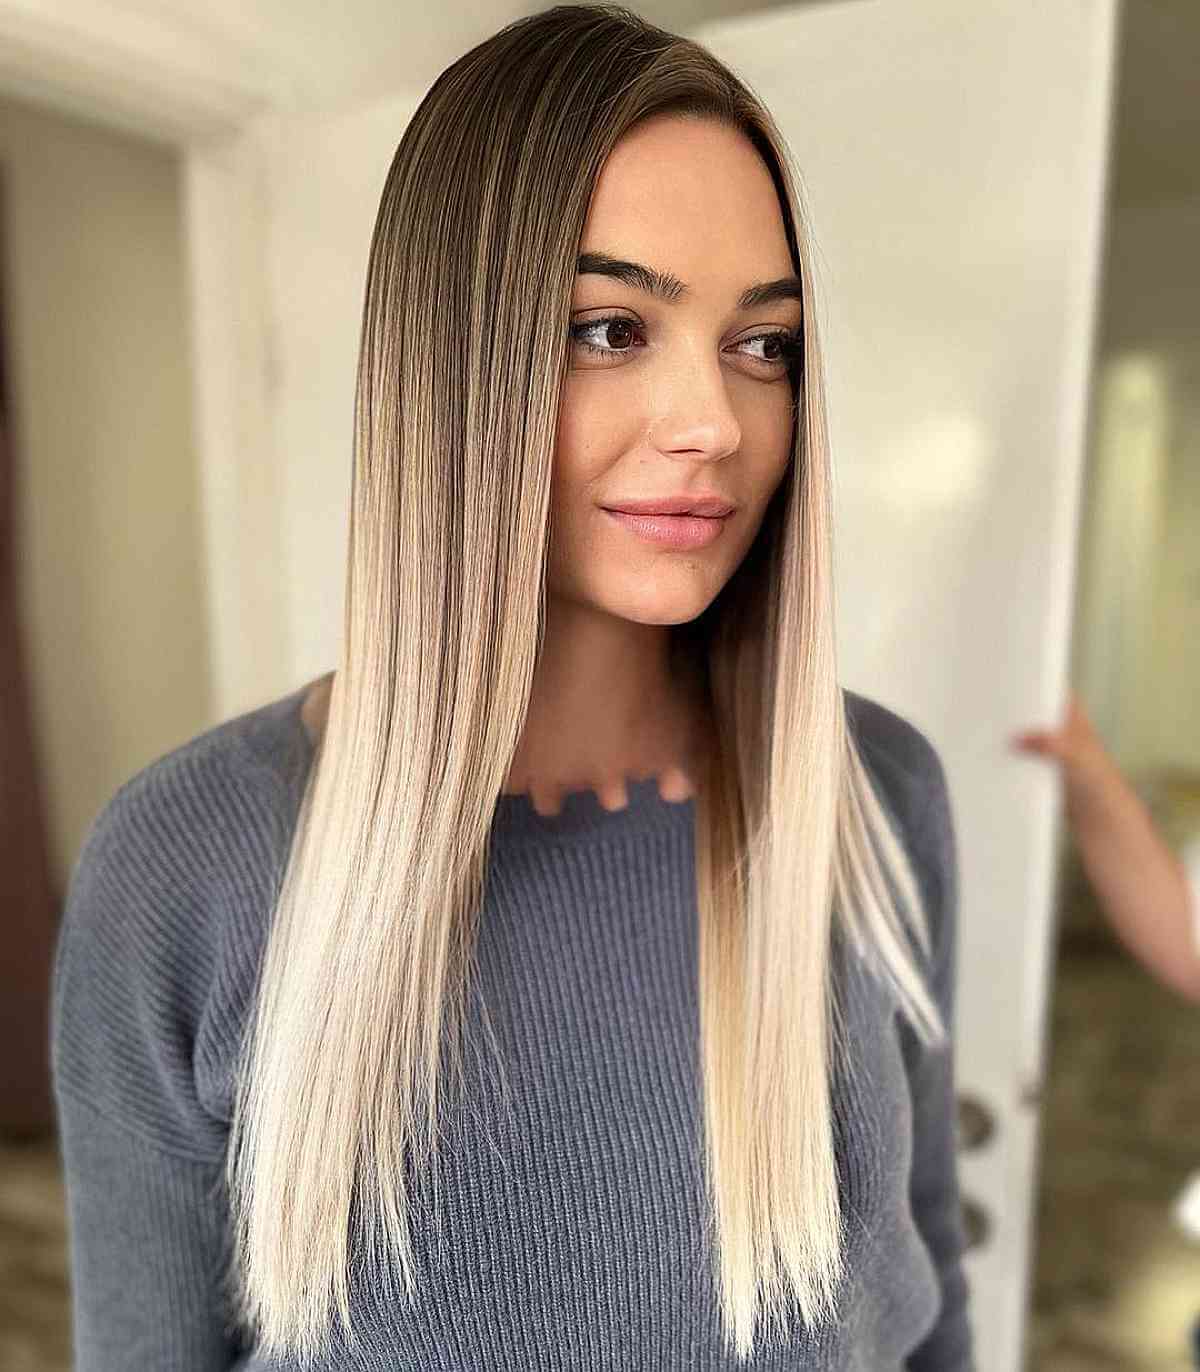 Sleek Brown Roots to Blonde Ends Hairstyle